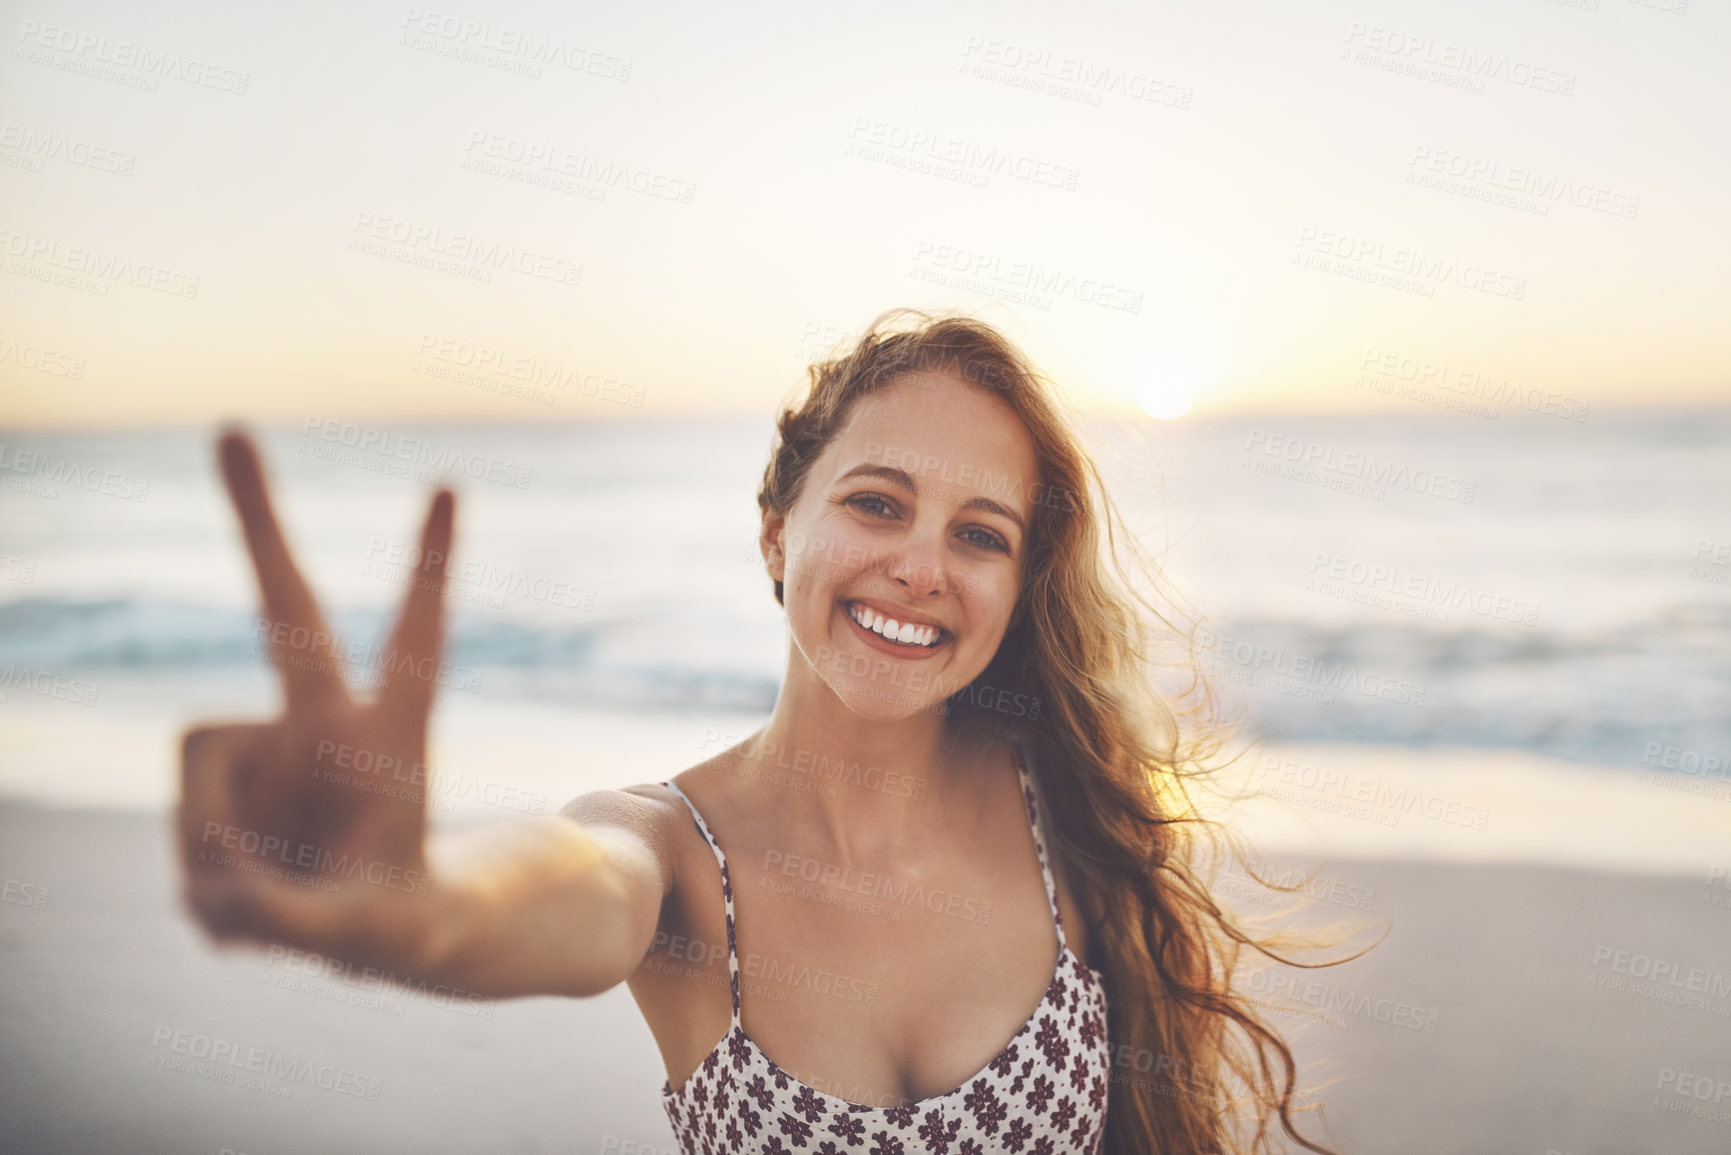 Buy stock photo Shot of a woman showing the peace sign while standing on the beach